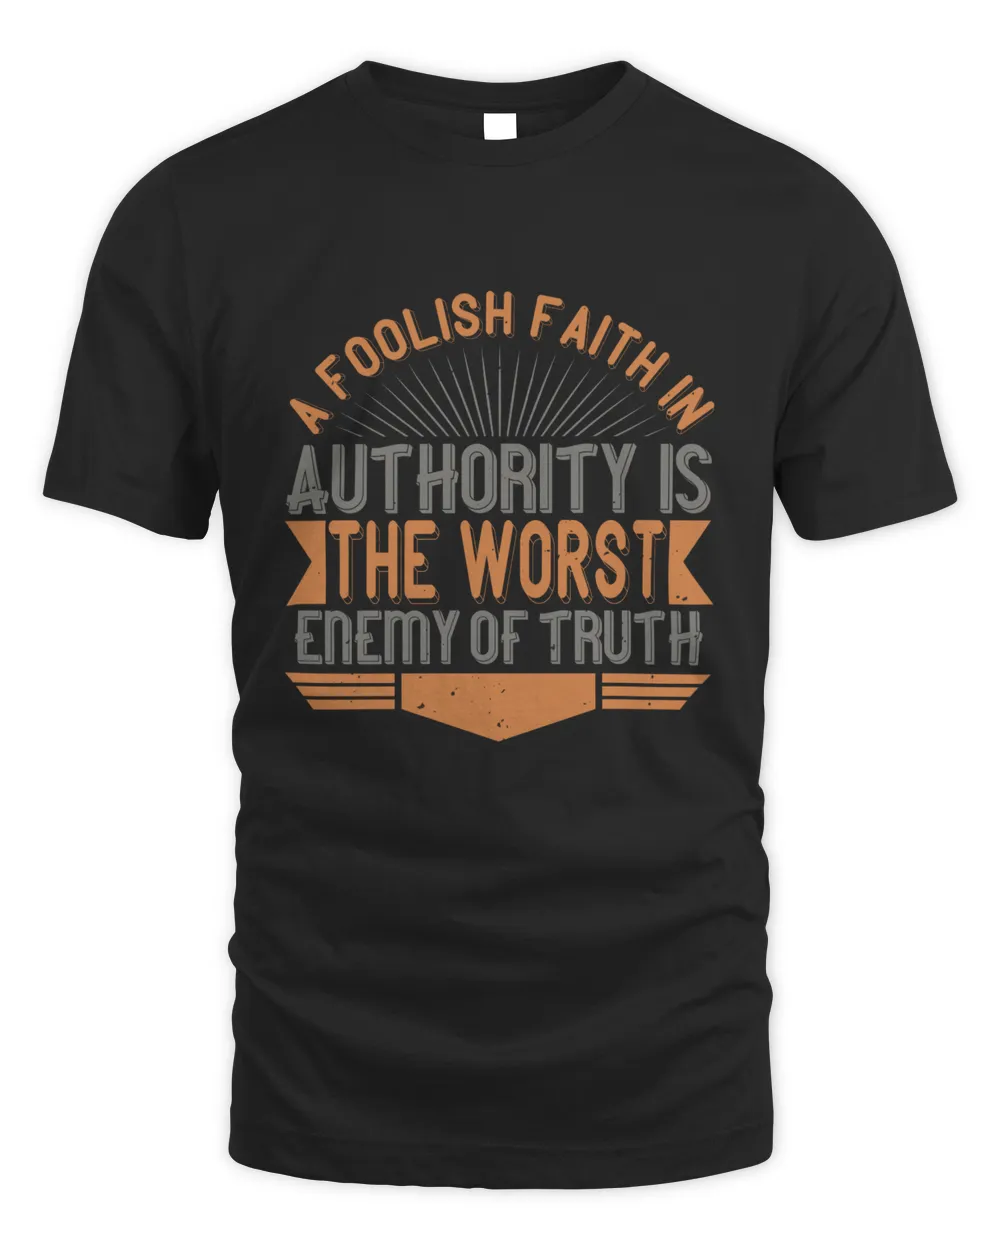 A foolish faith in authority is the worst enemy of truth T-Shirt